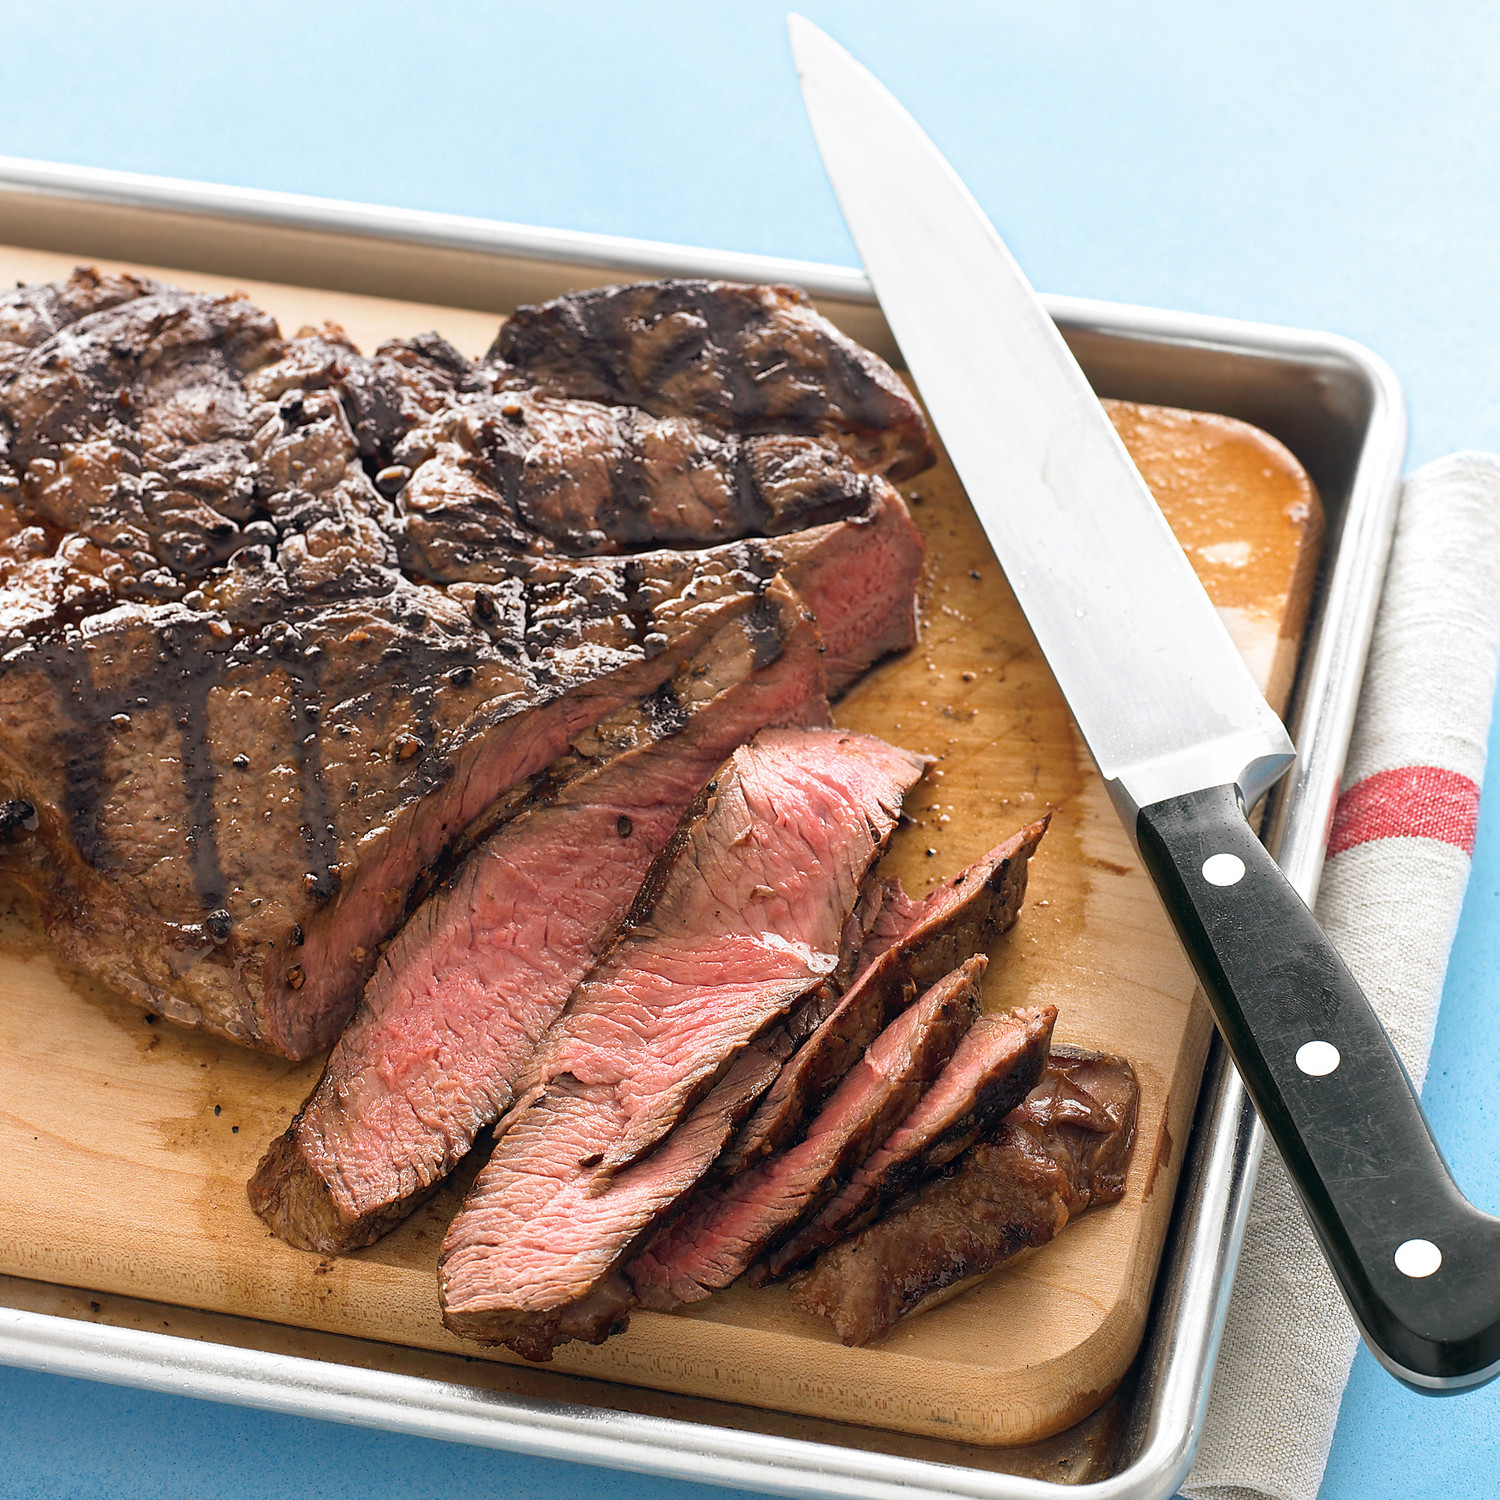 Beef clipart slice meat. Grilled sirloin steak with